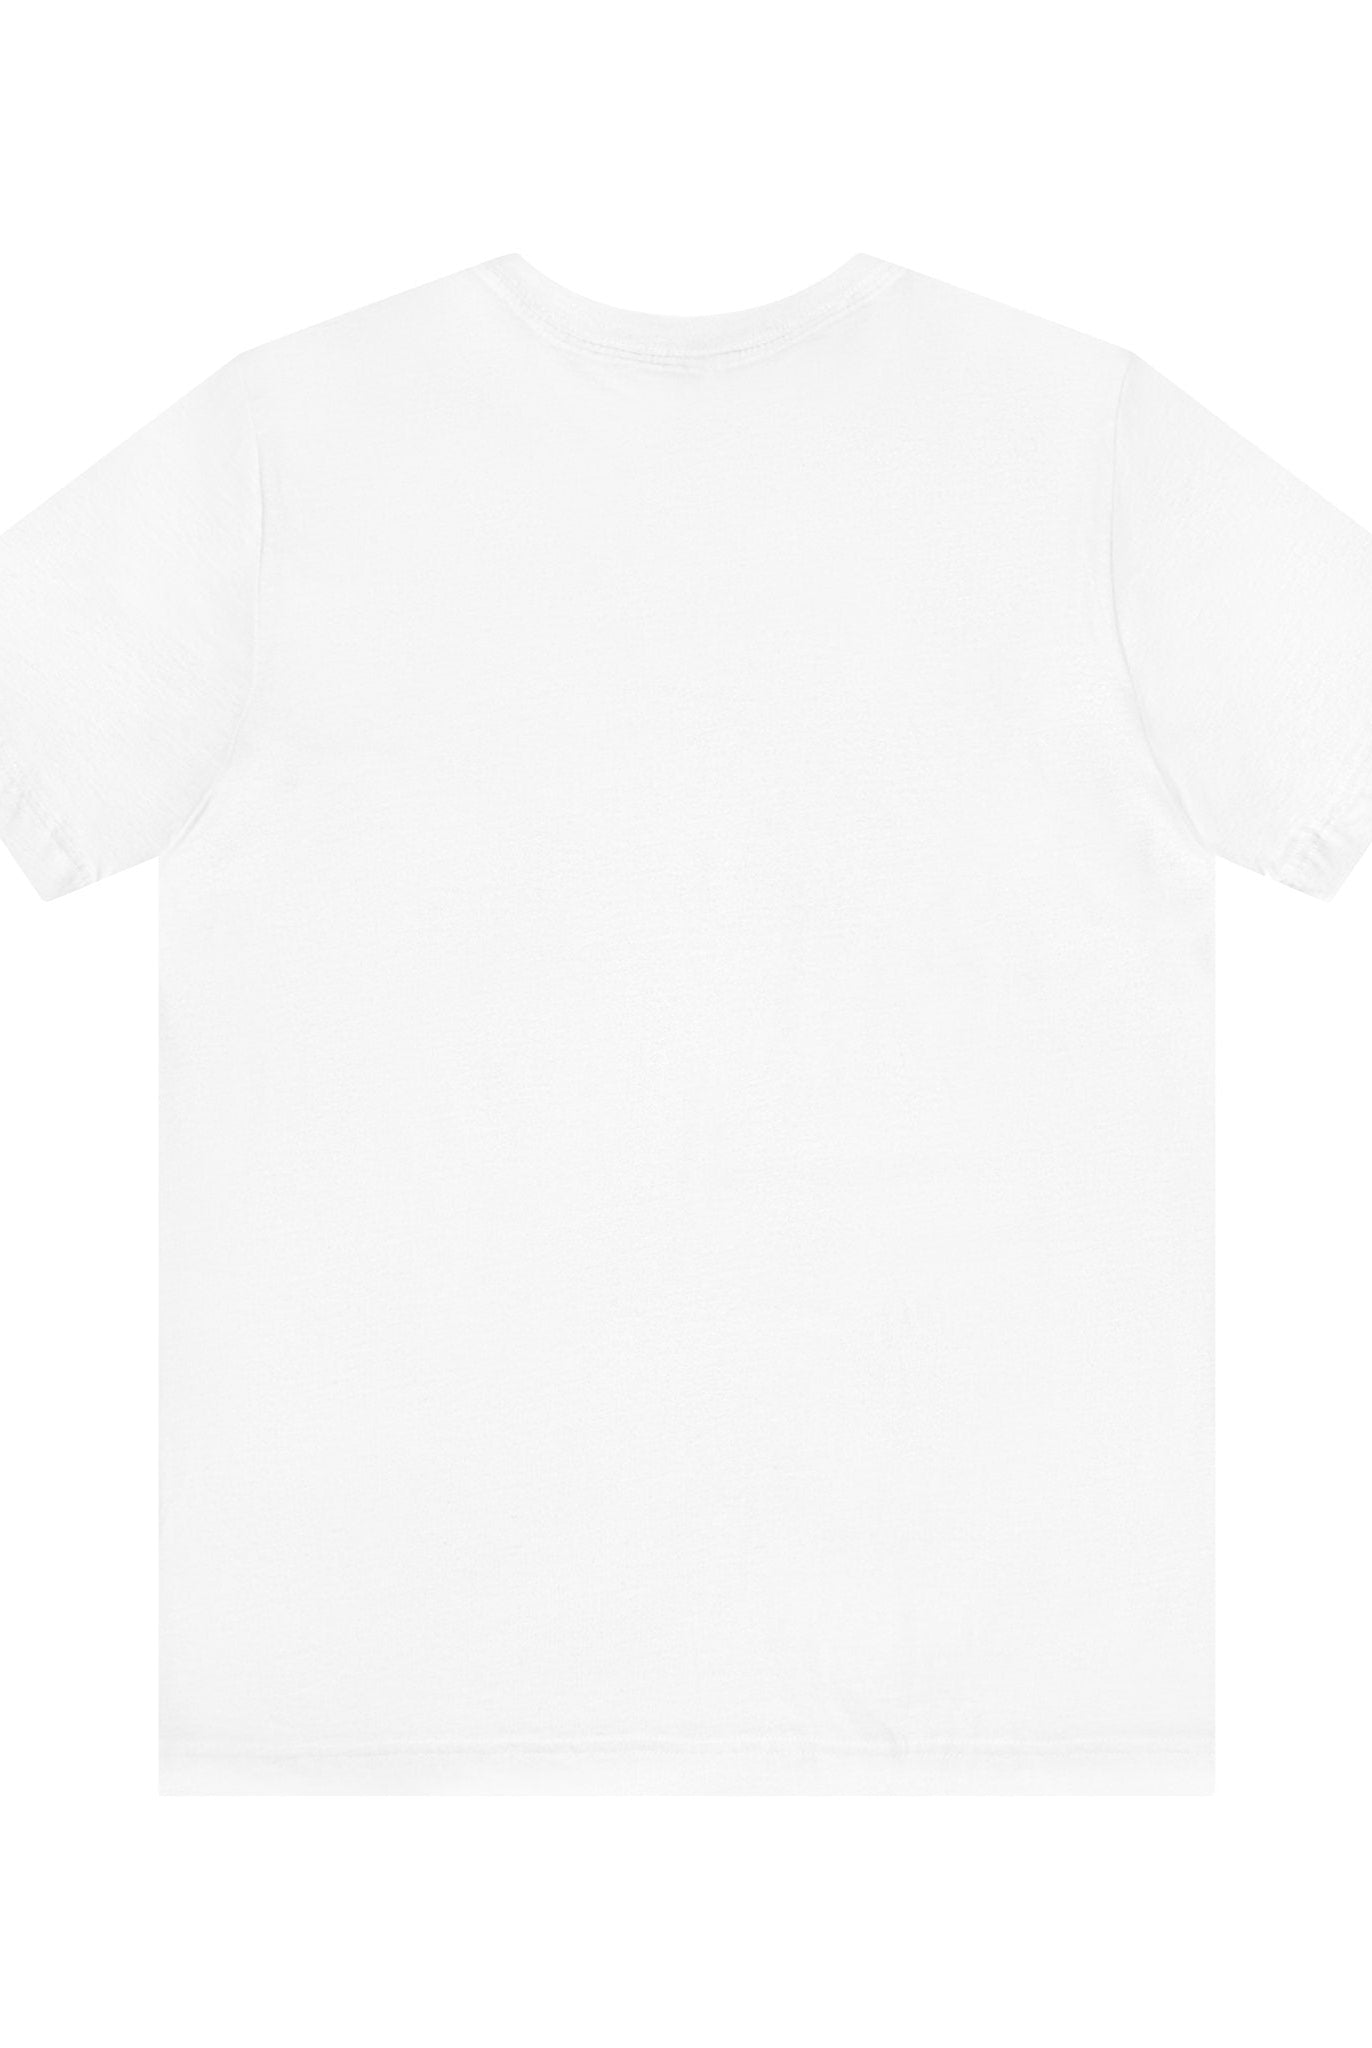 White Unisex T-Shirt with Small Logo, Direct-to-Garment Printed - Be Amazing by Soulshinecreators